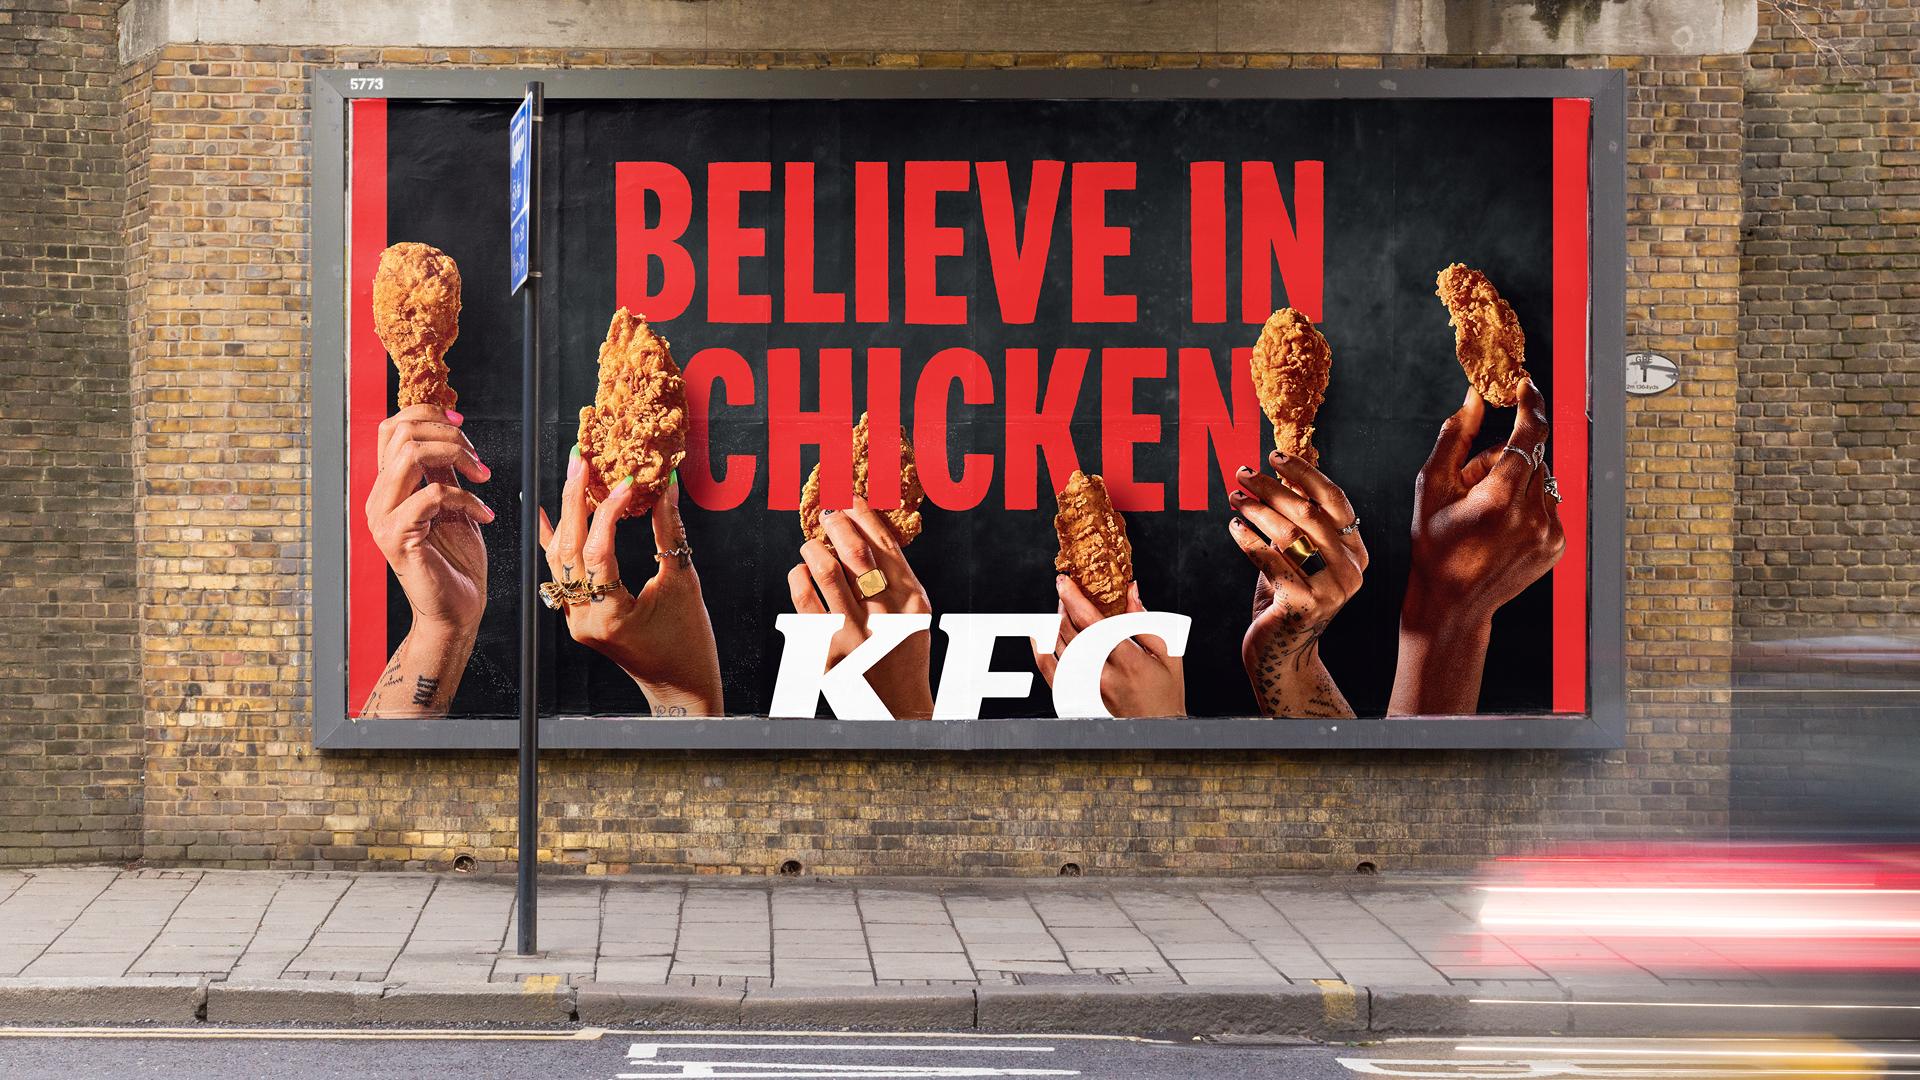 An image of a KFC poster with their new advert: "Believe In Chicken". Showing multiple hands holding up chicken wings from KFC.